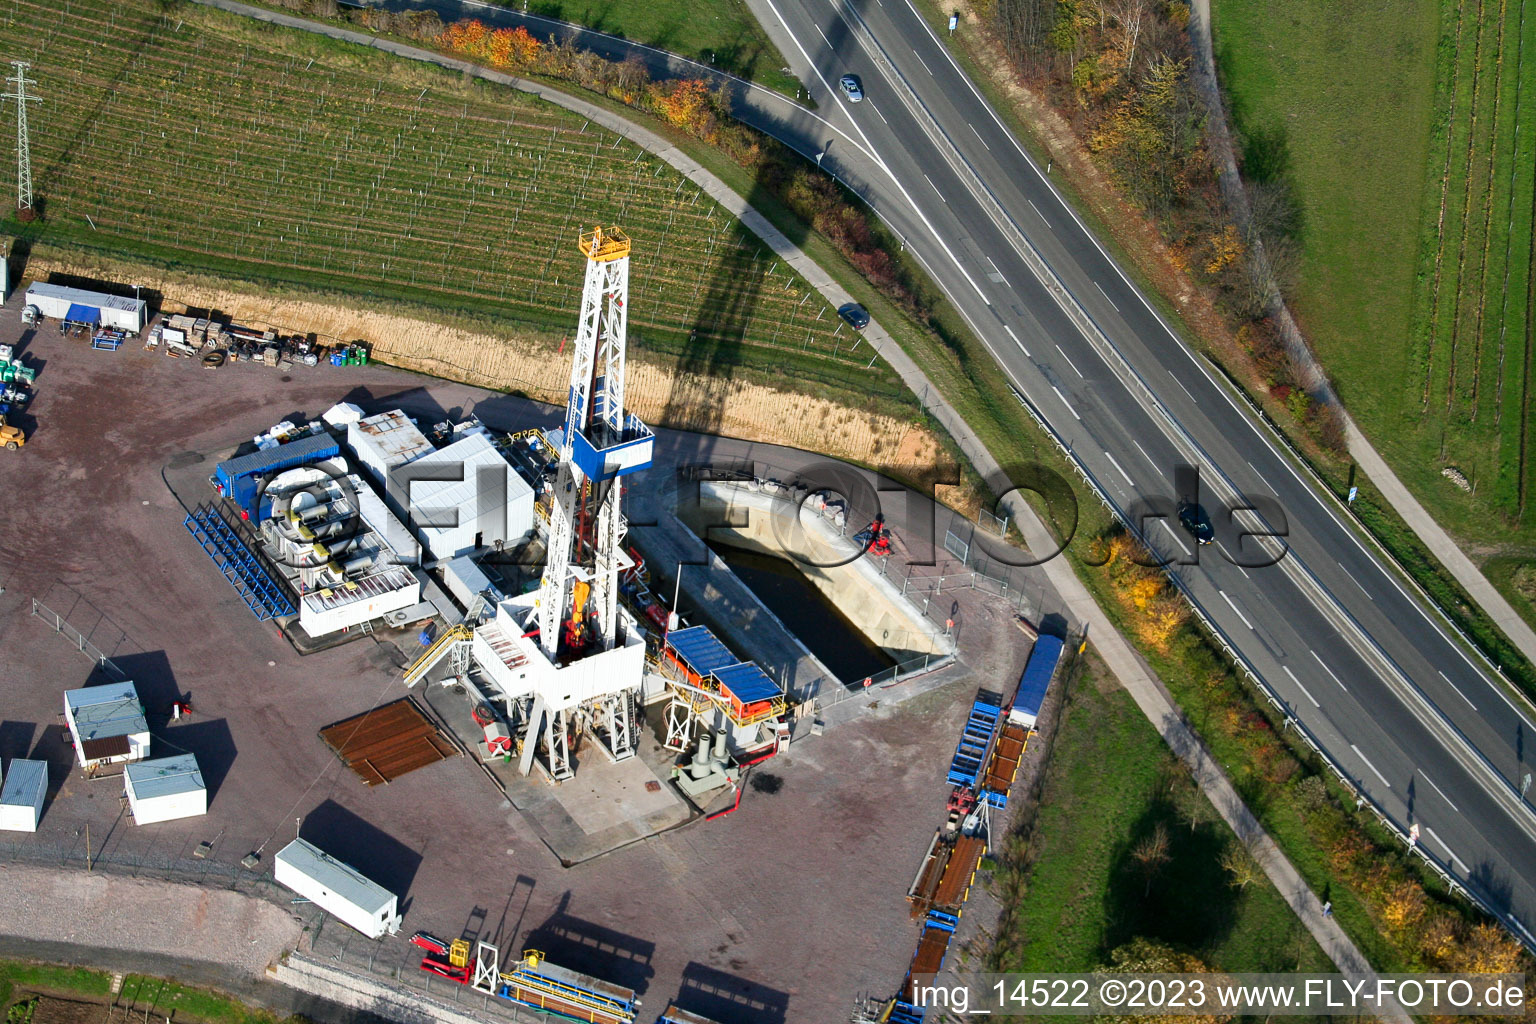 Geothermal drilling in Insheim in the state Rhineland-Palatinate, Germany seen from above